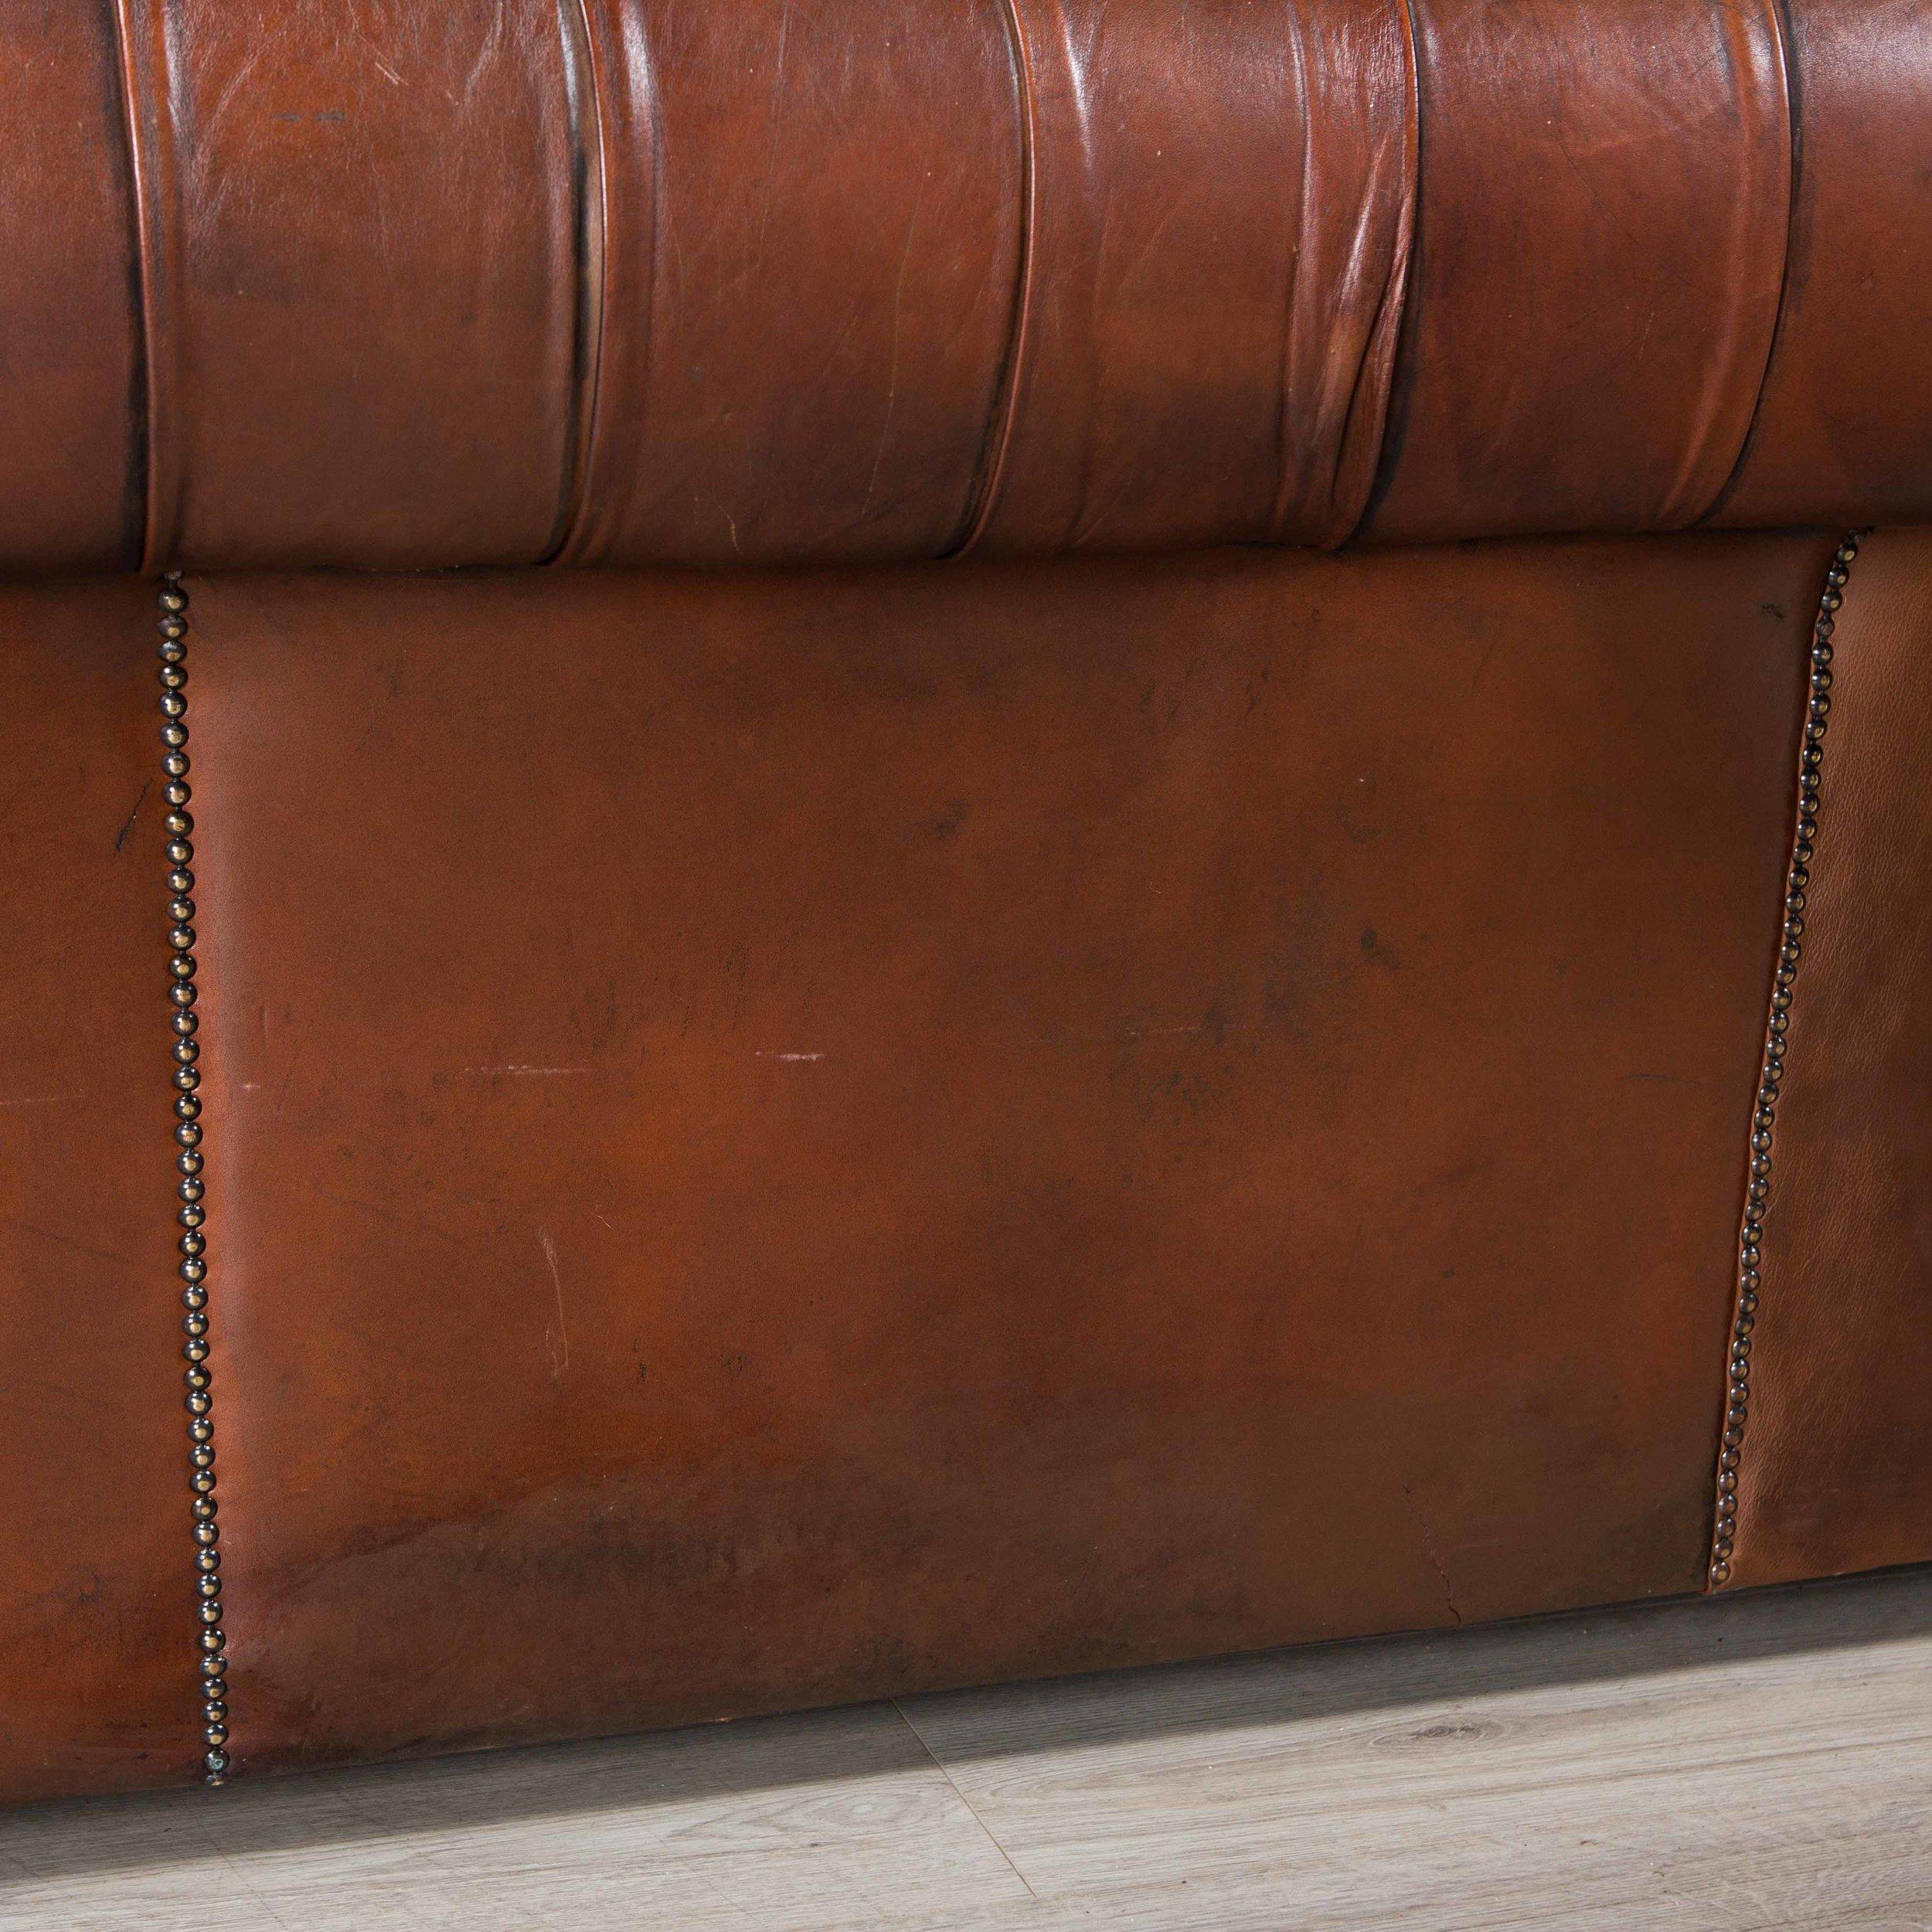 Superb Chesterfield Leather Sofa with Button Down Seat 4